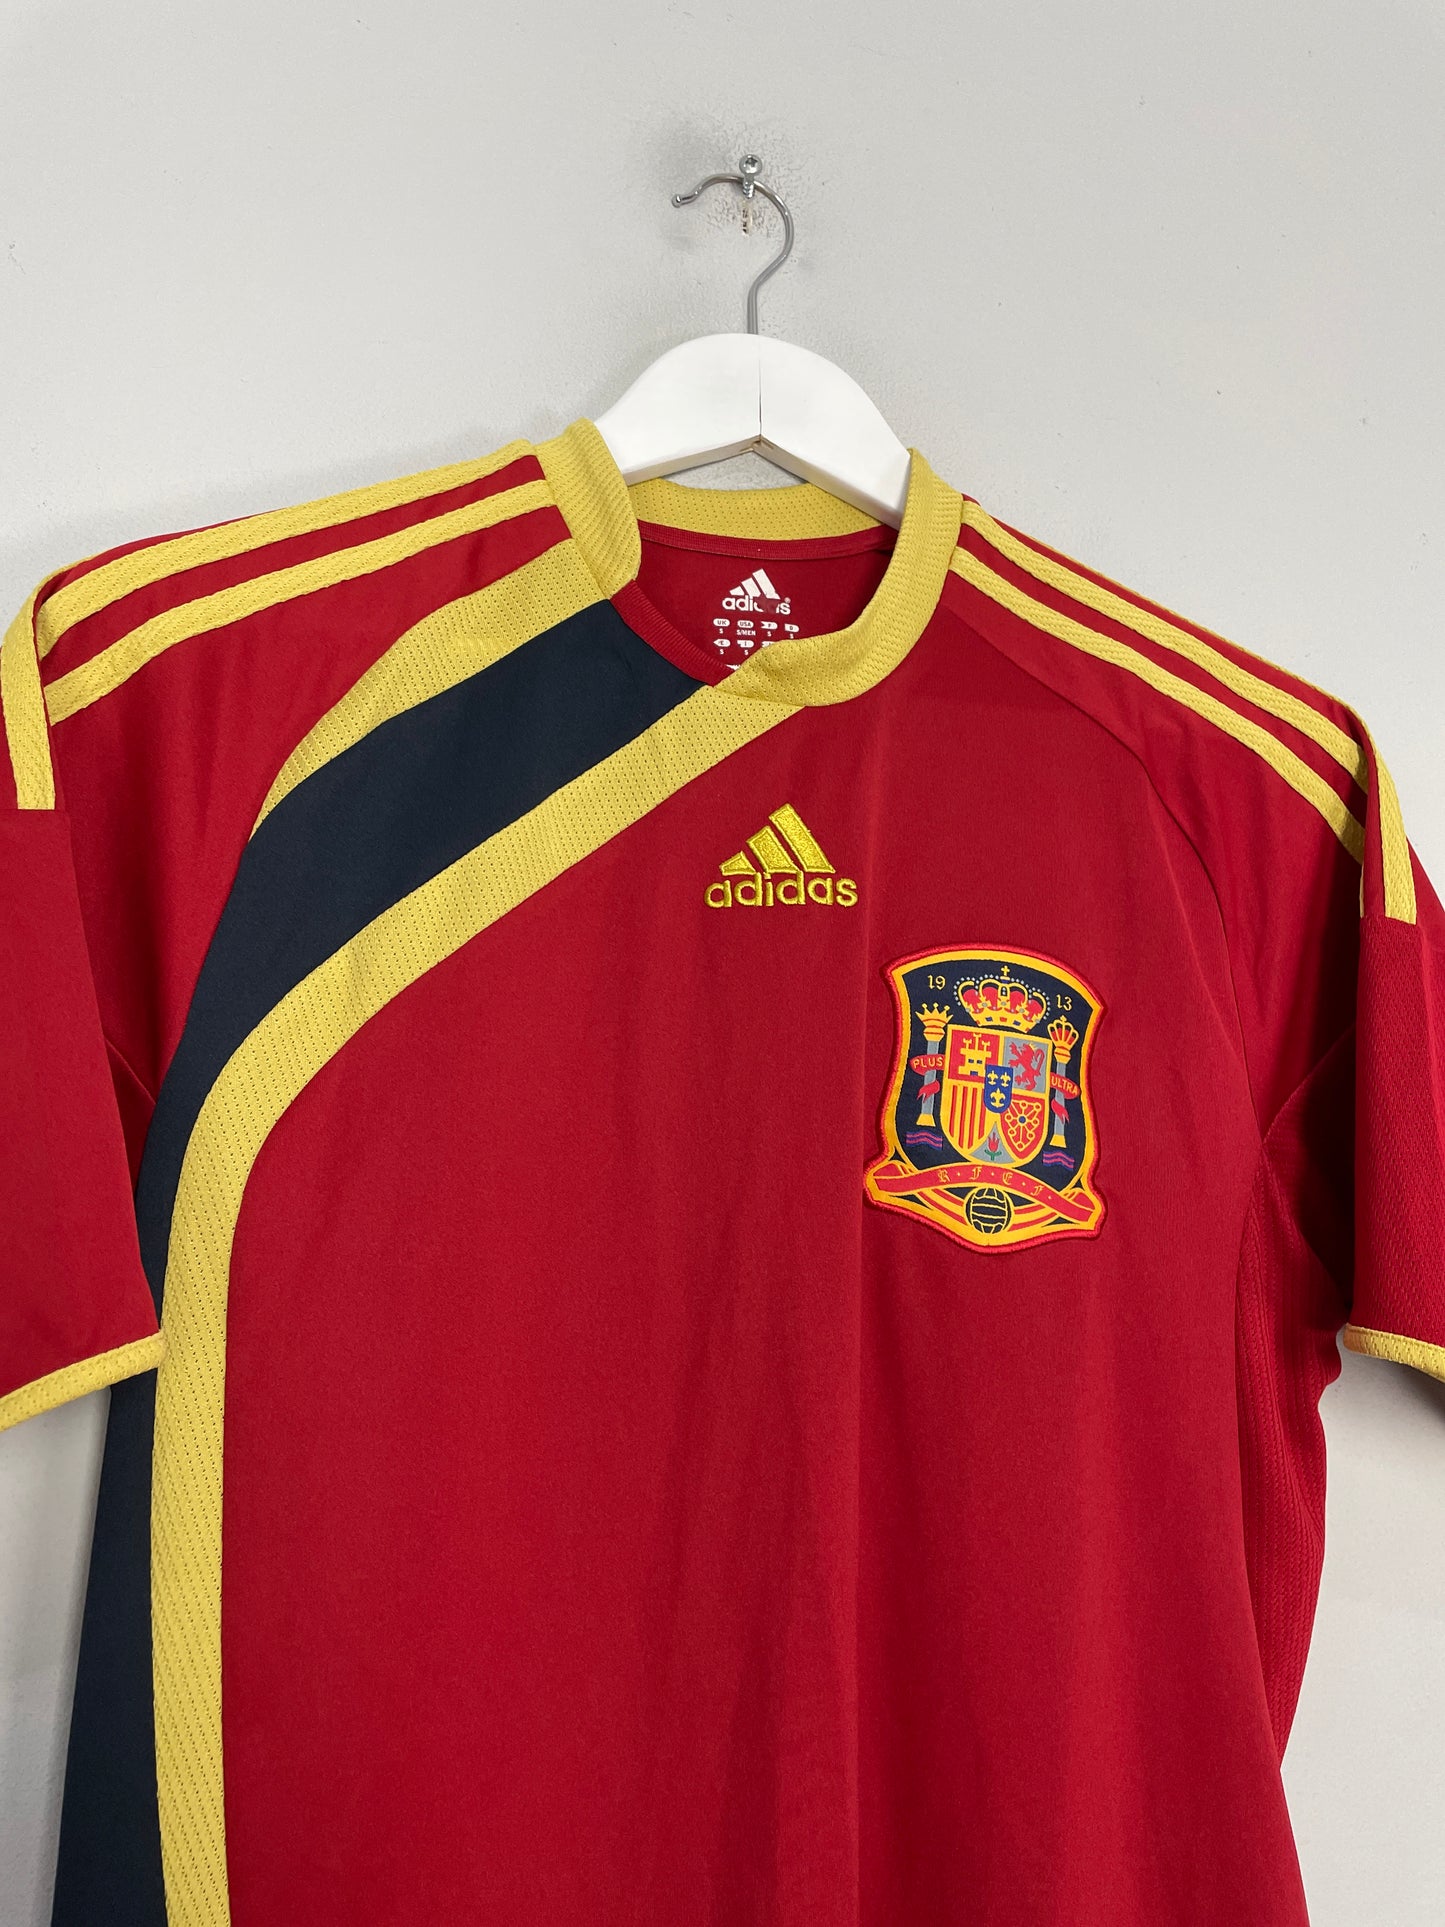 2009 SPAIN CONFEDERATIONS CUP HOME SHIRT (S) ADIDAS